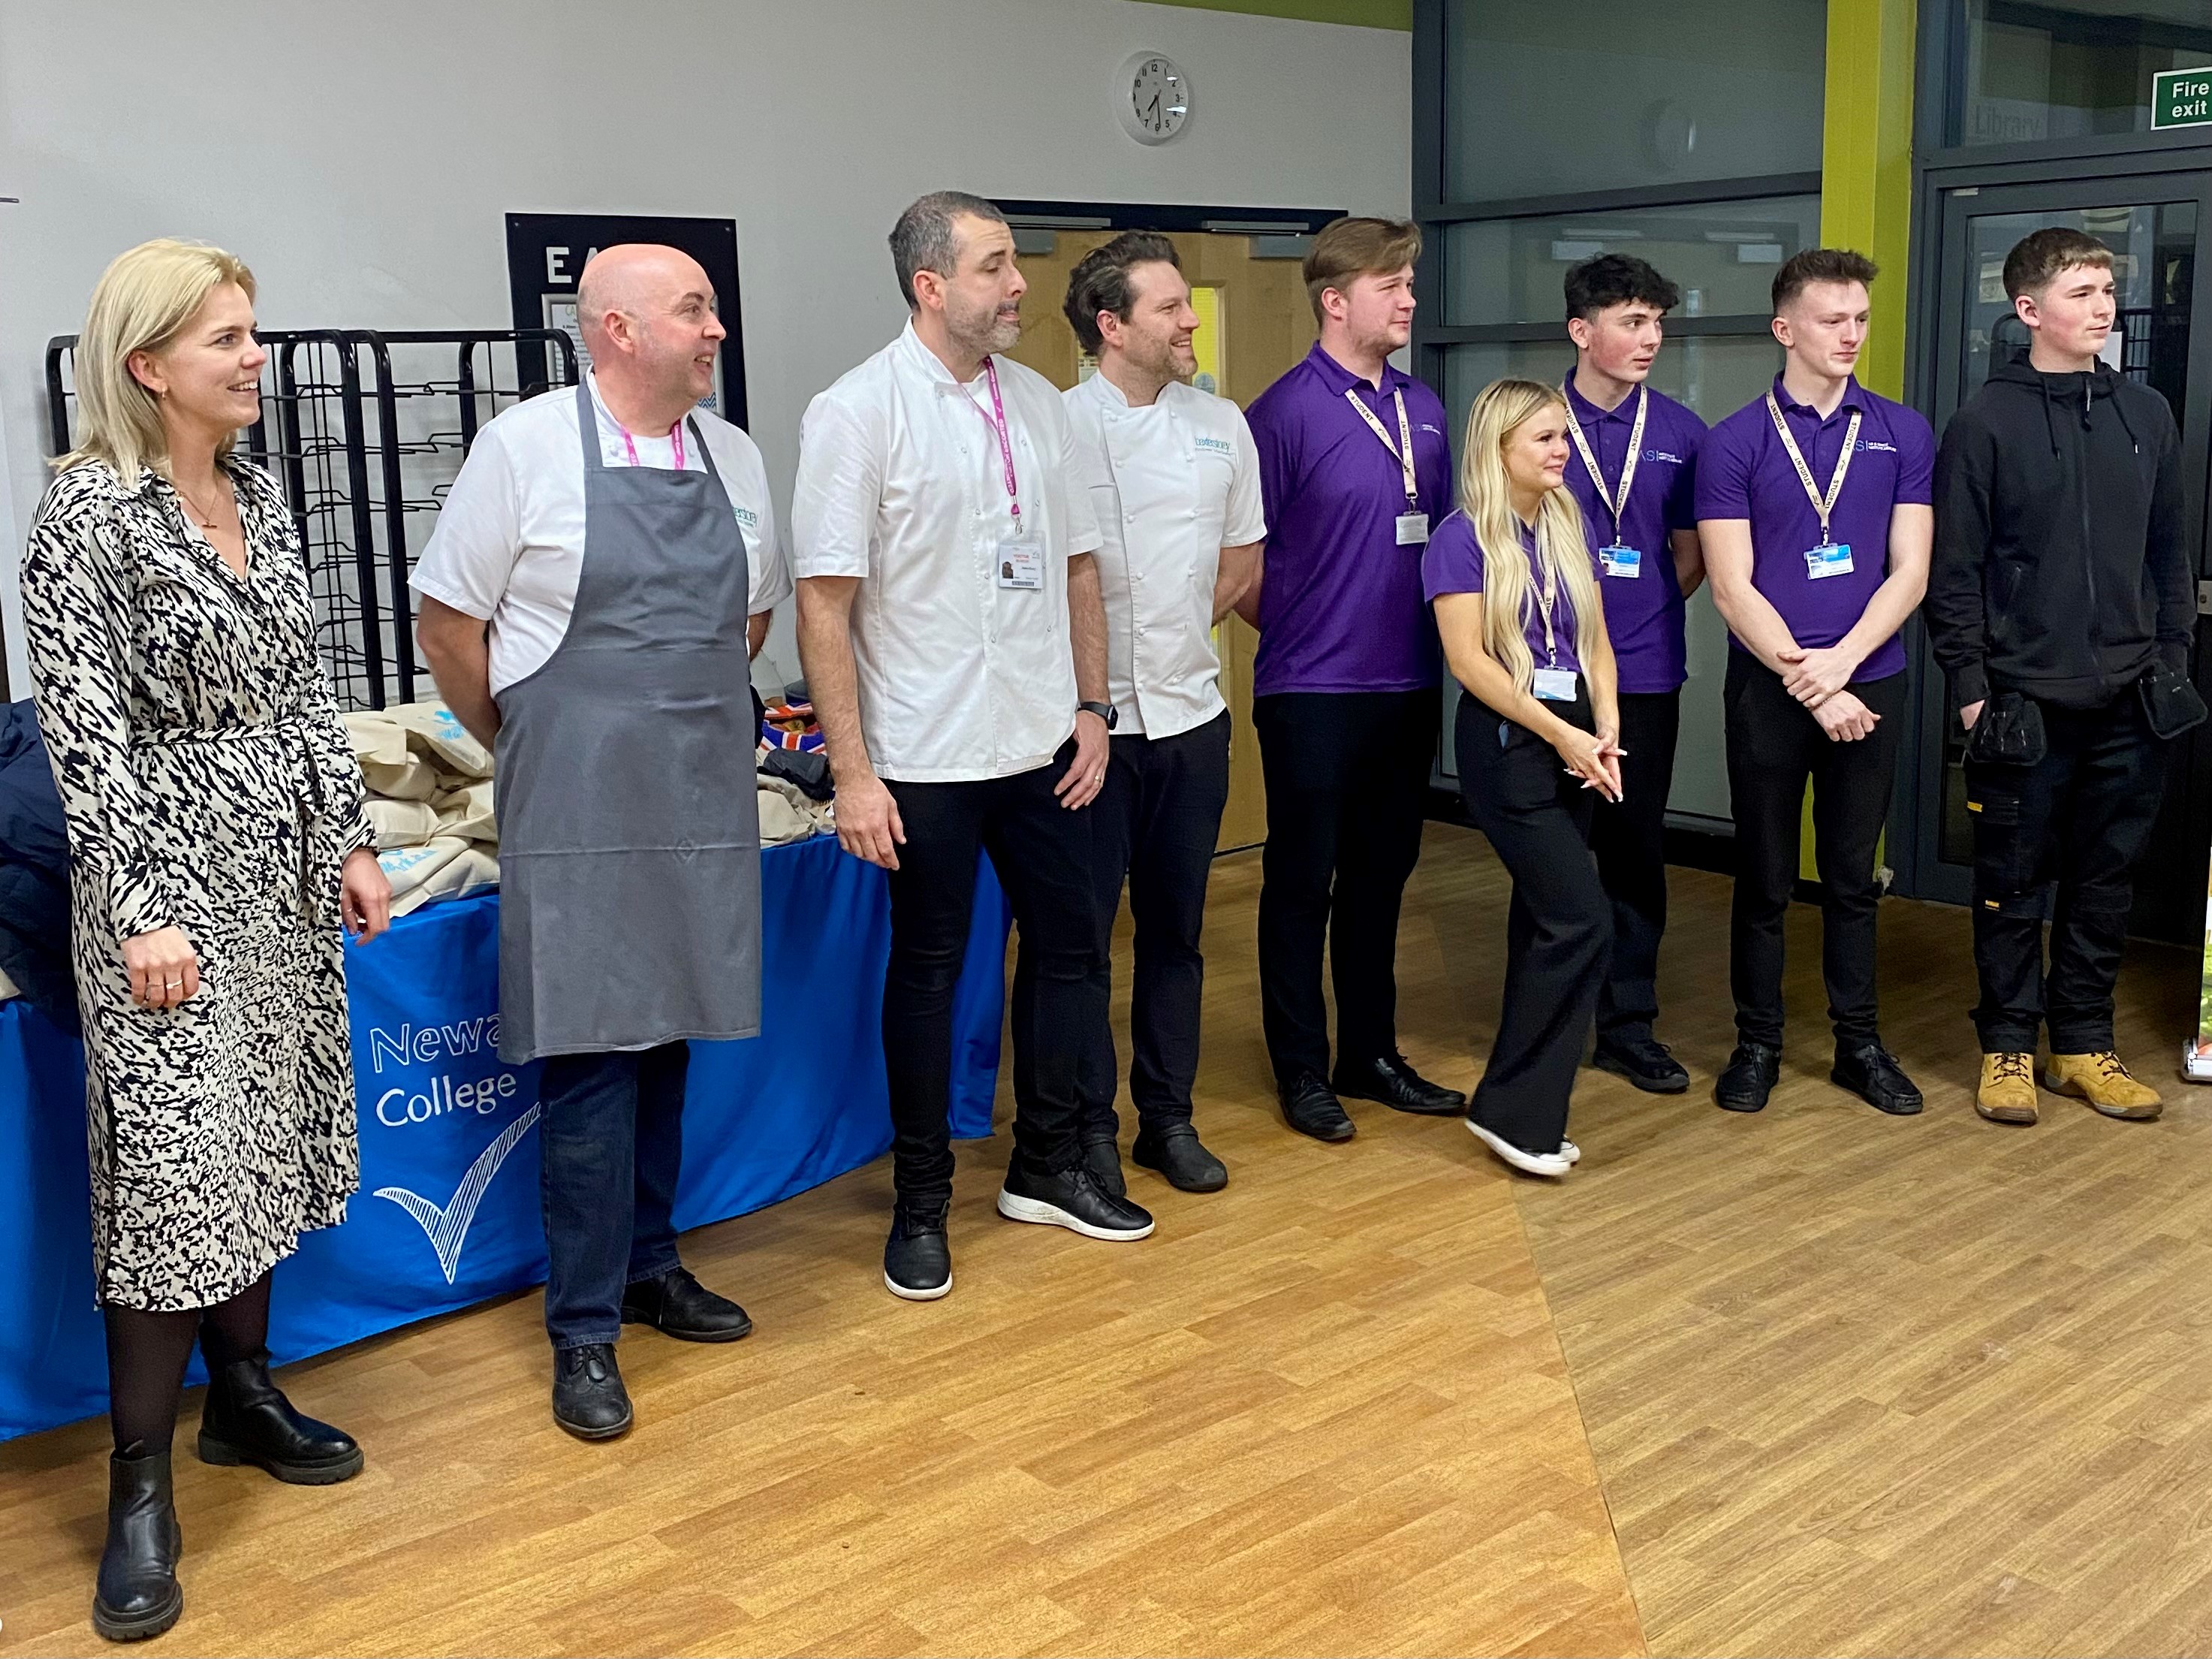 Thank you to BaxterStorey, Restaurant Associates and the students at Newark College